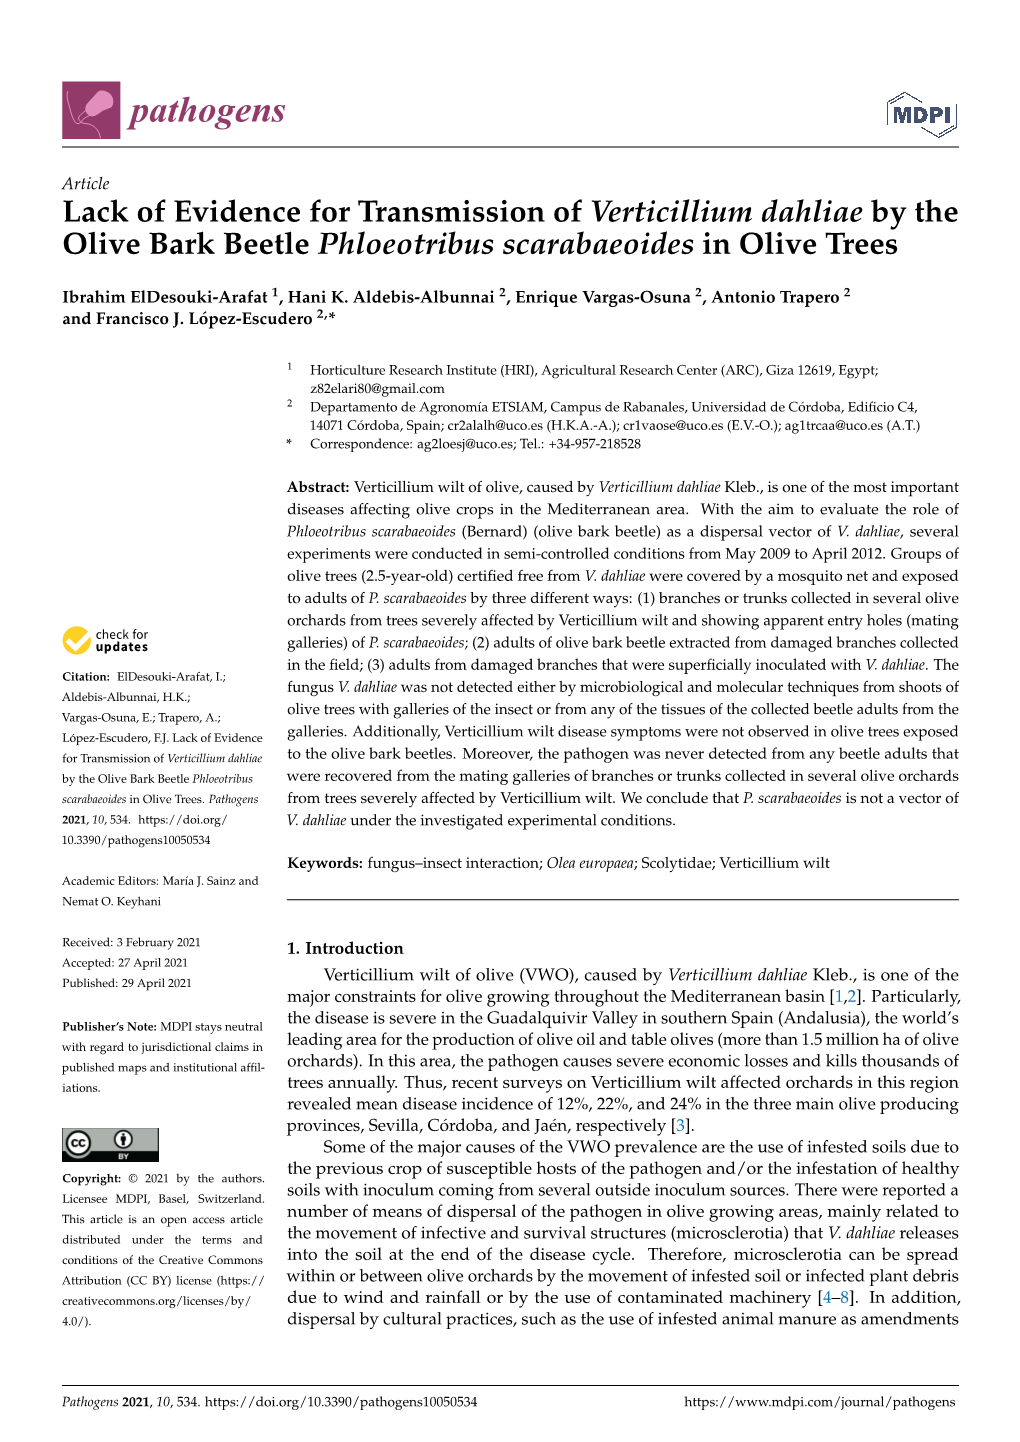 Lack of Evidence for Transmission of Verticillium Dahliae by the Olive Bark Beetle Phloeotribus Scarabaeoides in Olive Trees